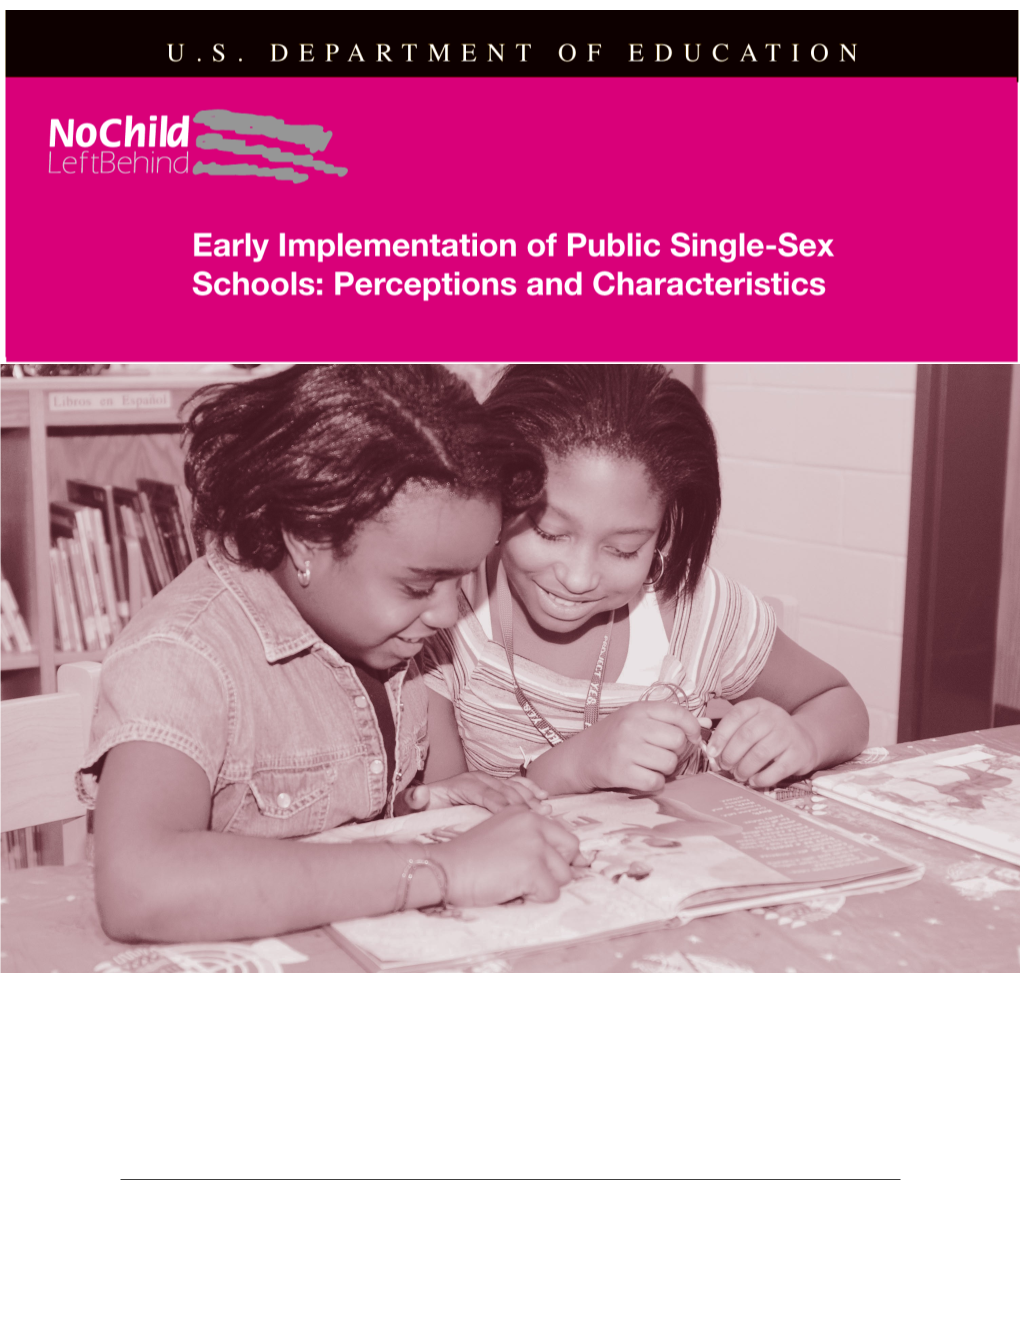 Early Implementation of Public Single-Sex Schools: Perceptions and Characteristics (MS Word)